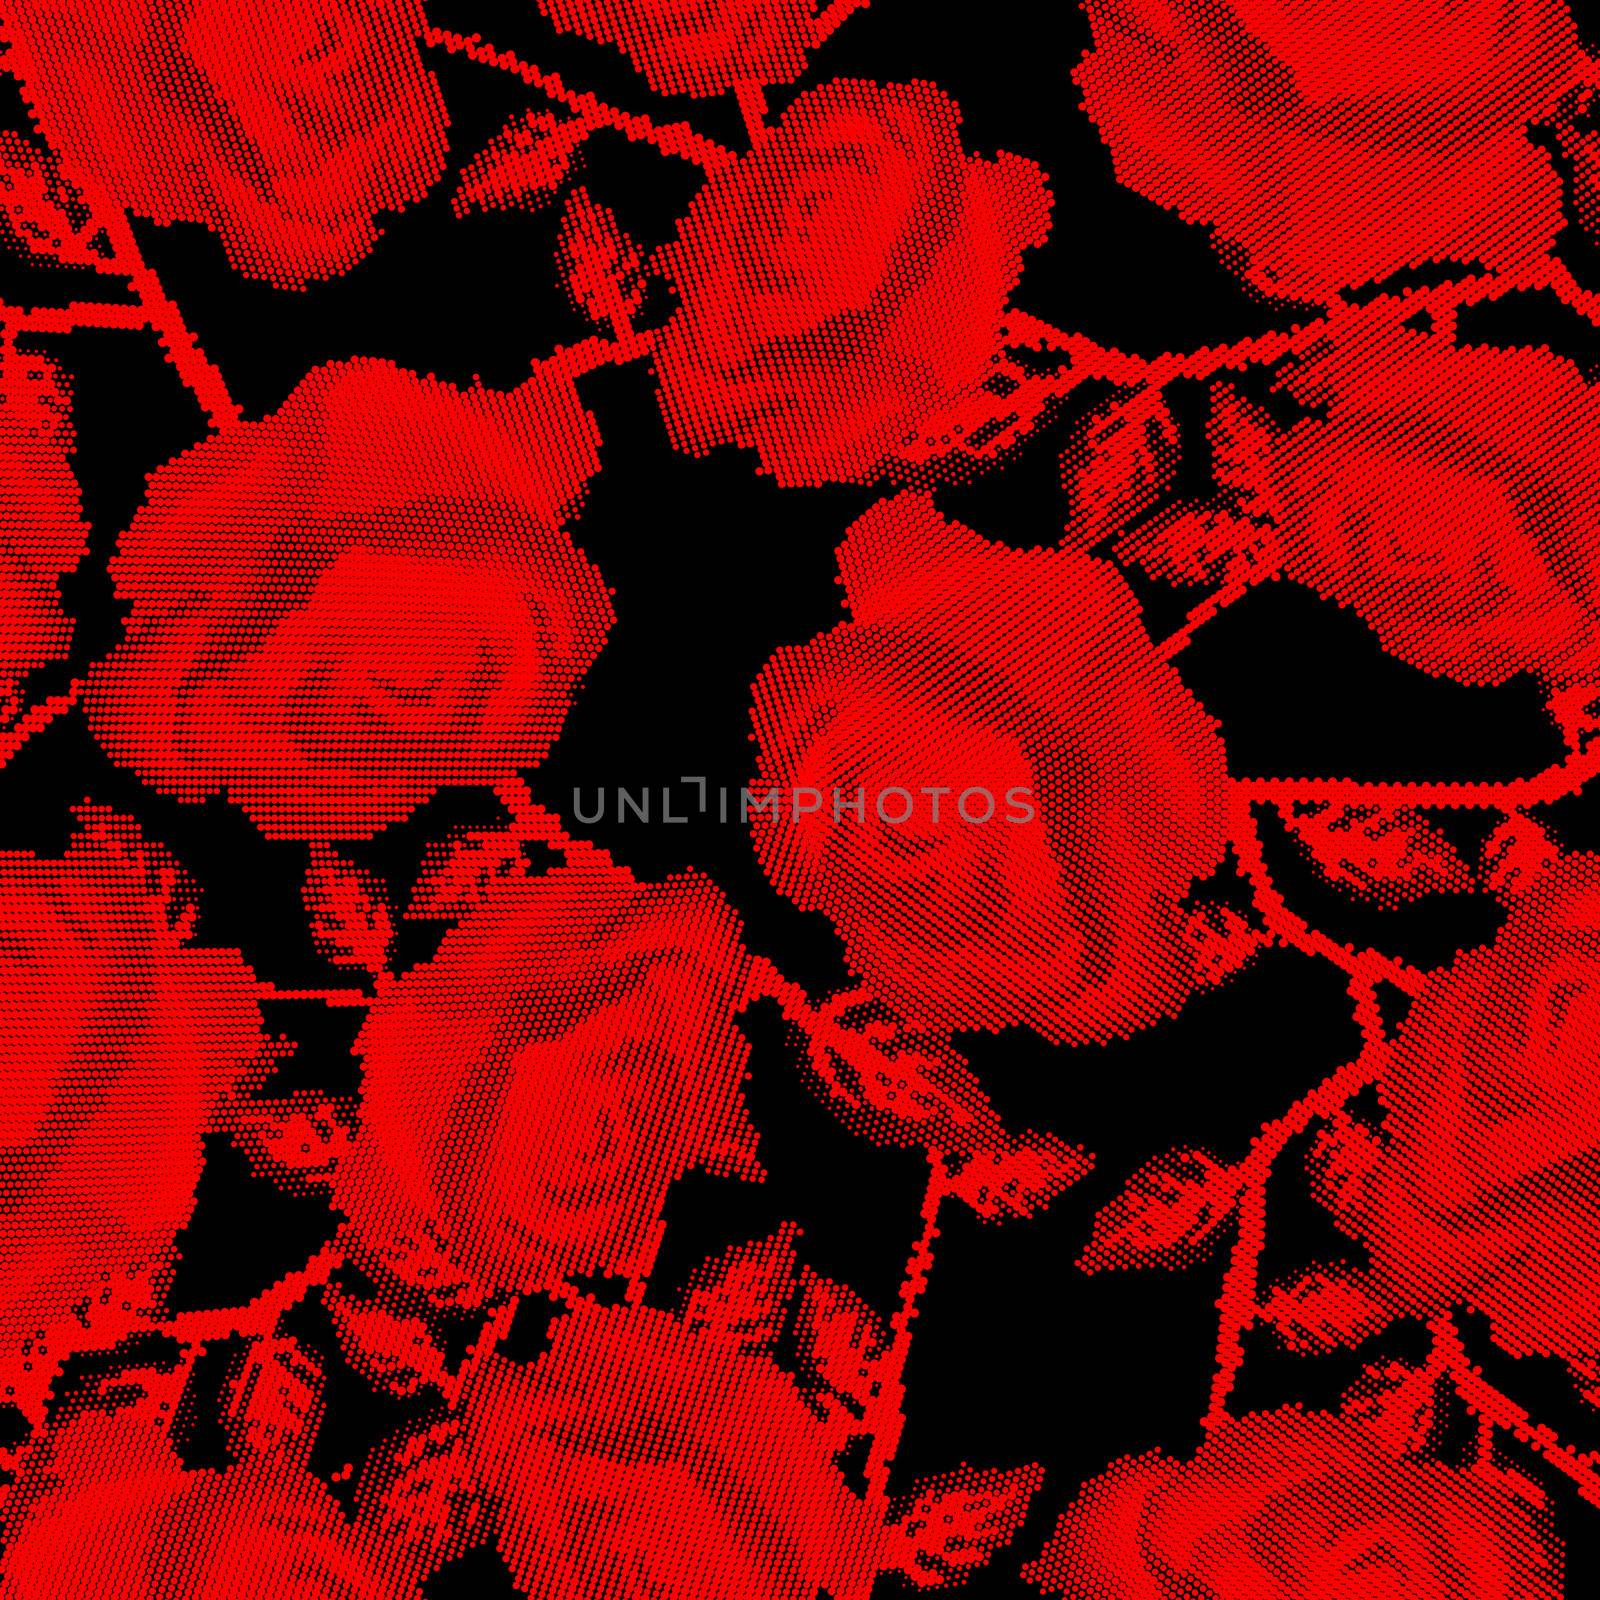 Halftone roses by Lirch